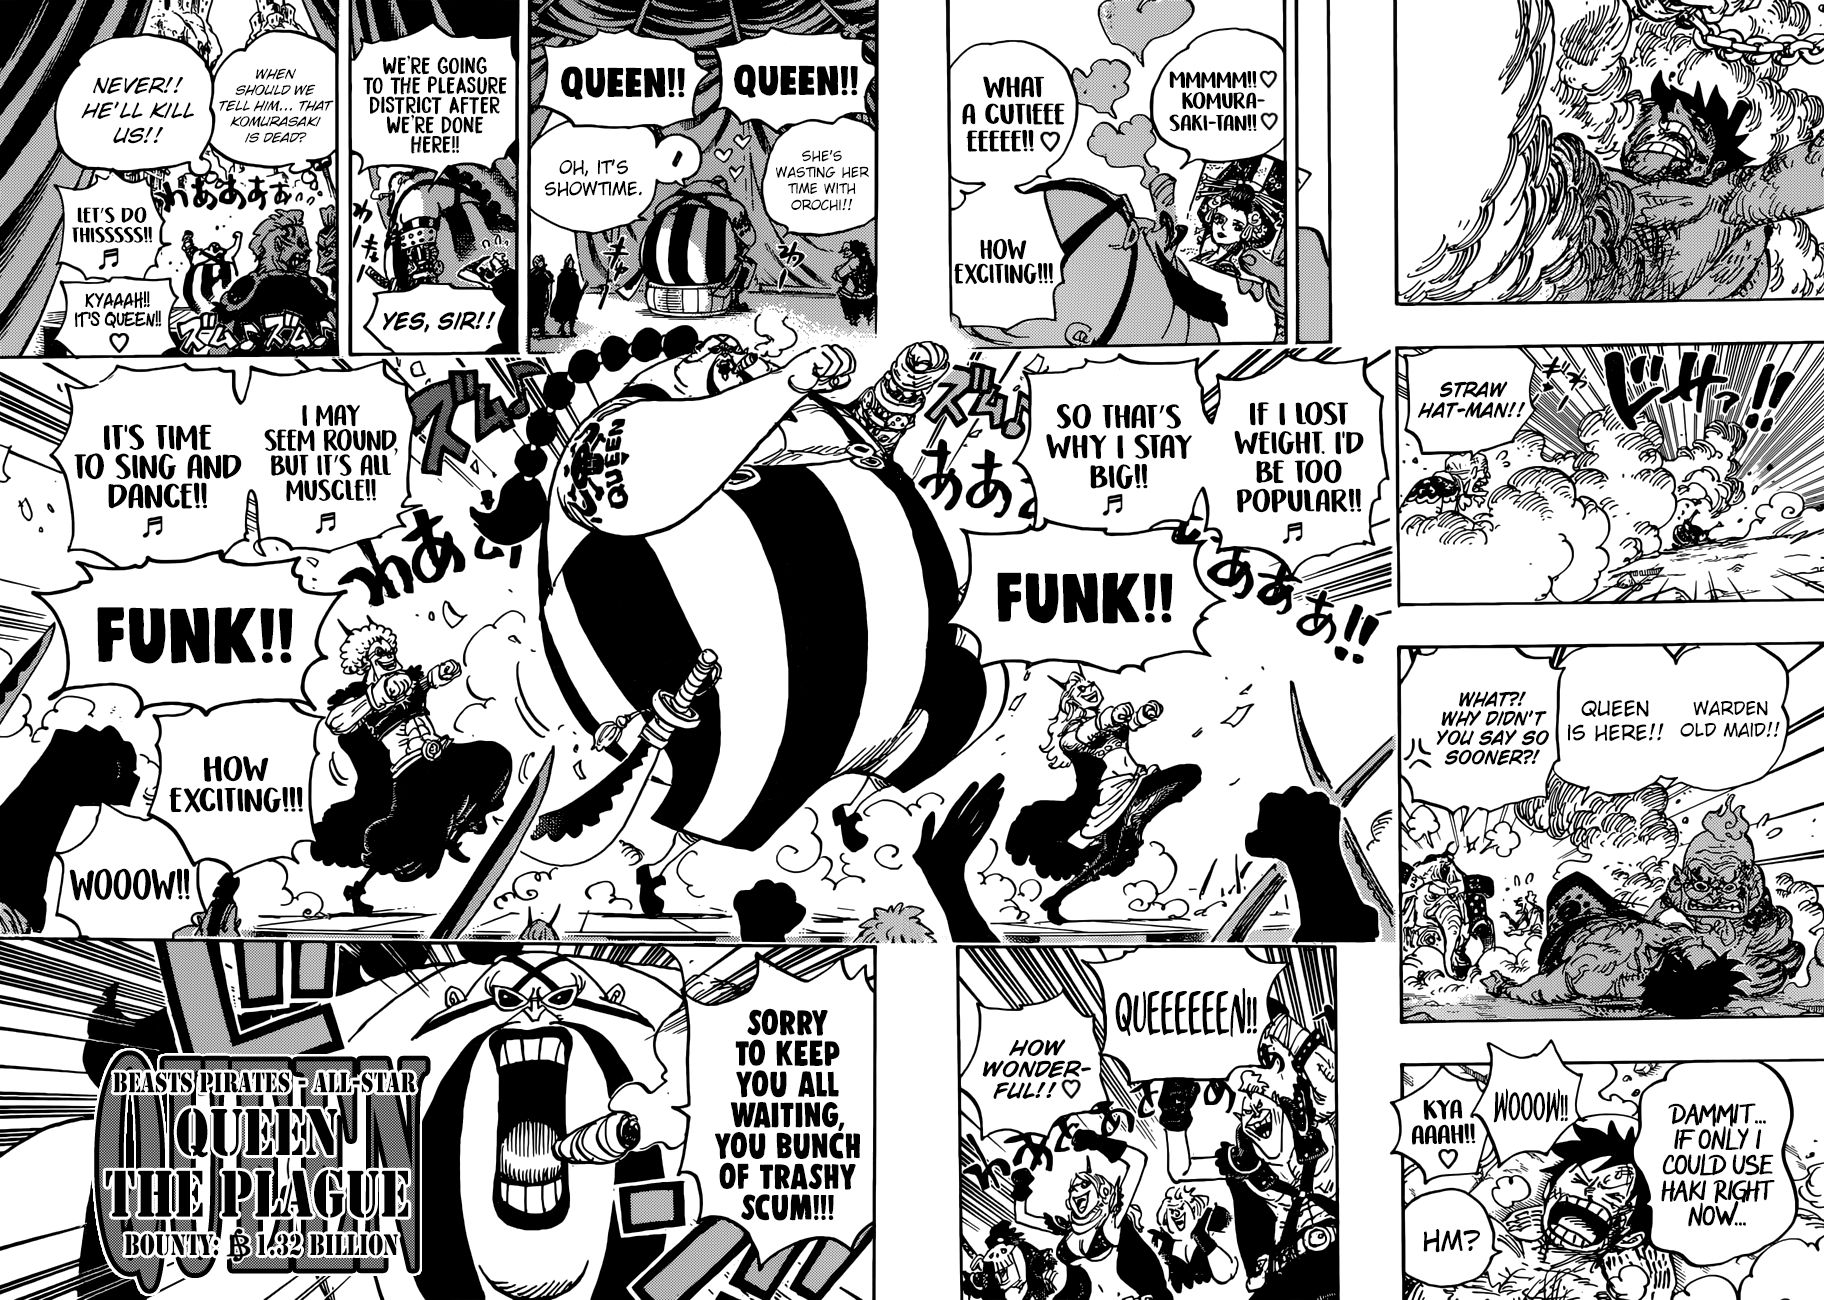 One Piece, Chapter 935 - Queen image 08